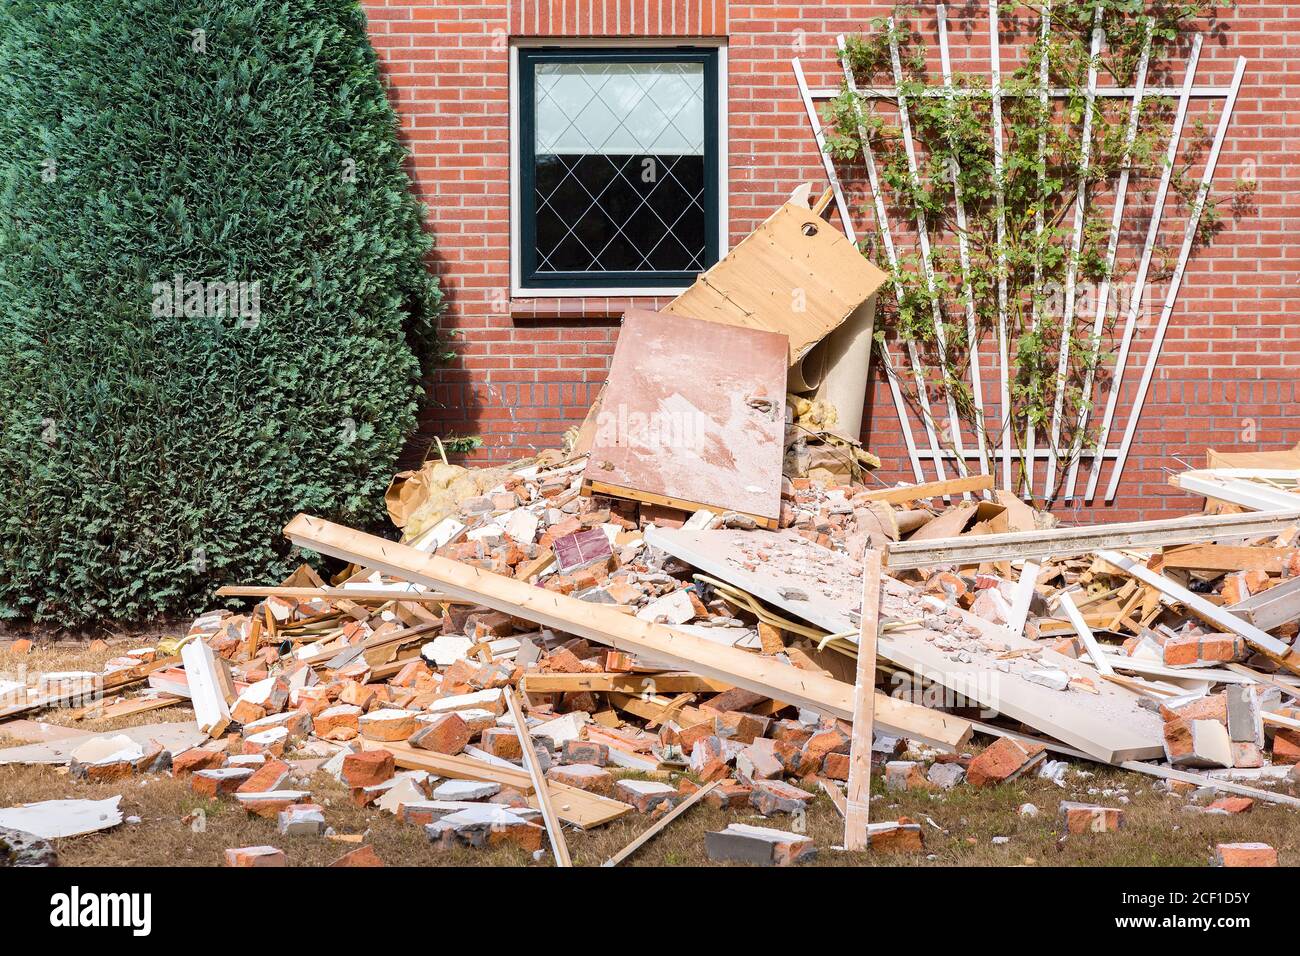 Renovations at european home with debris in garden Stock Photo